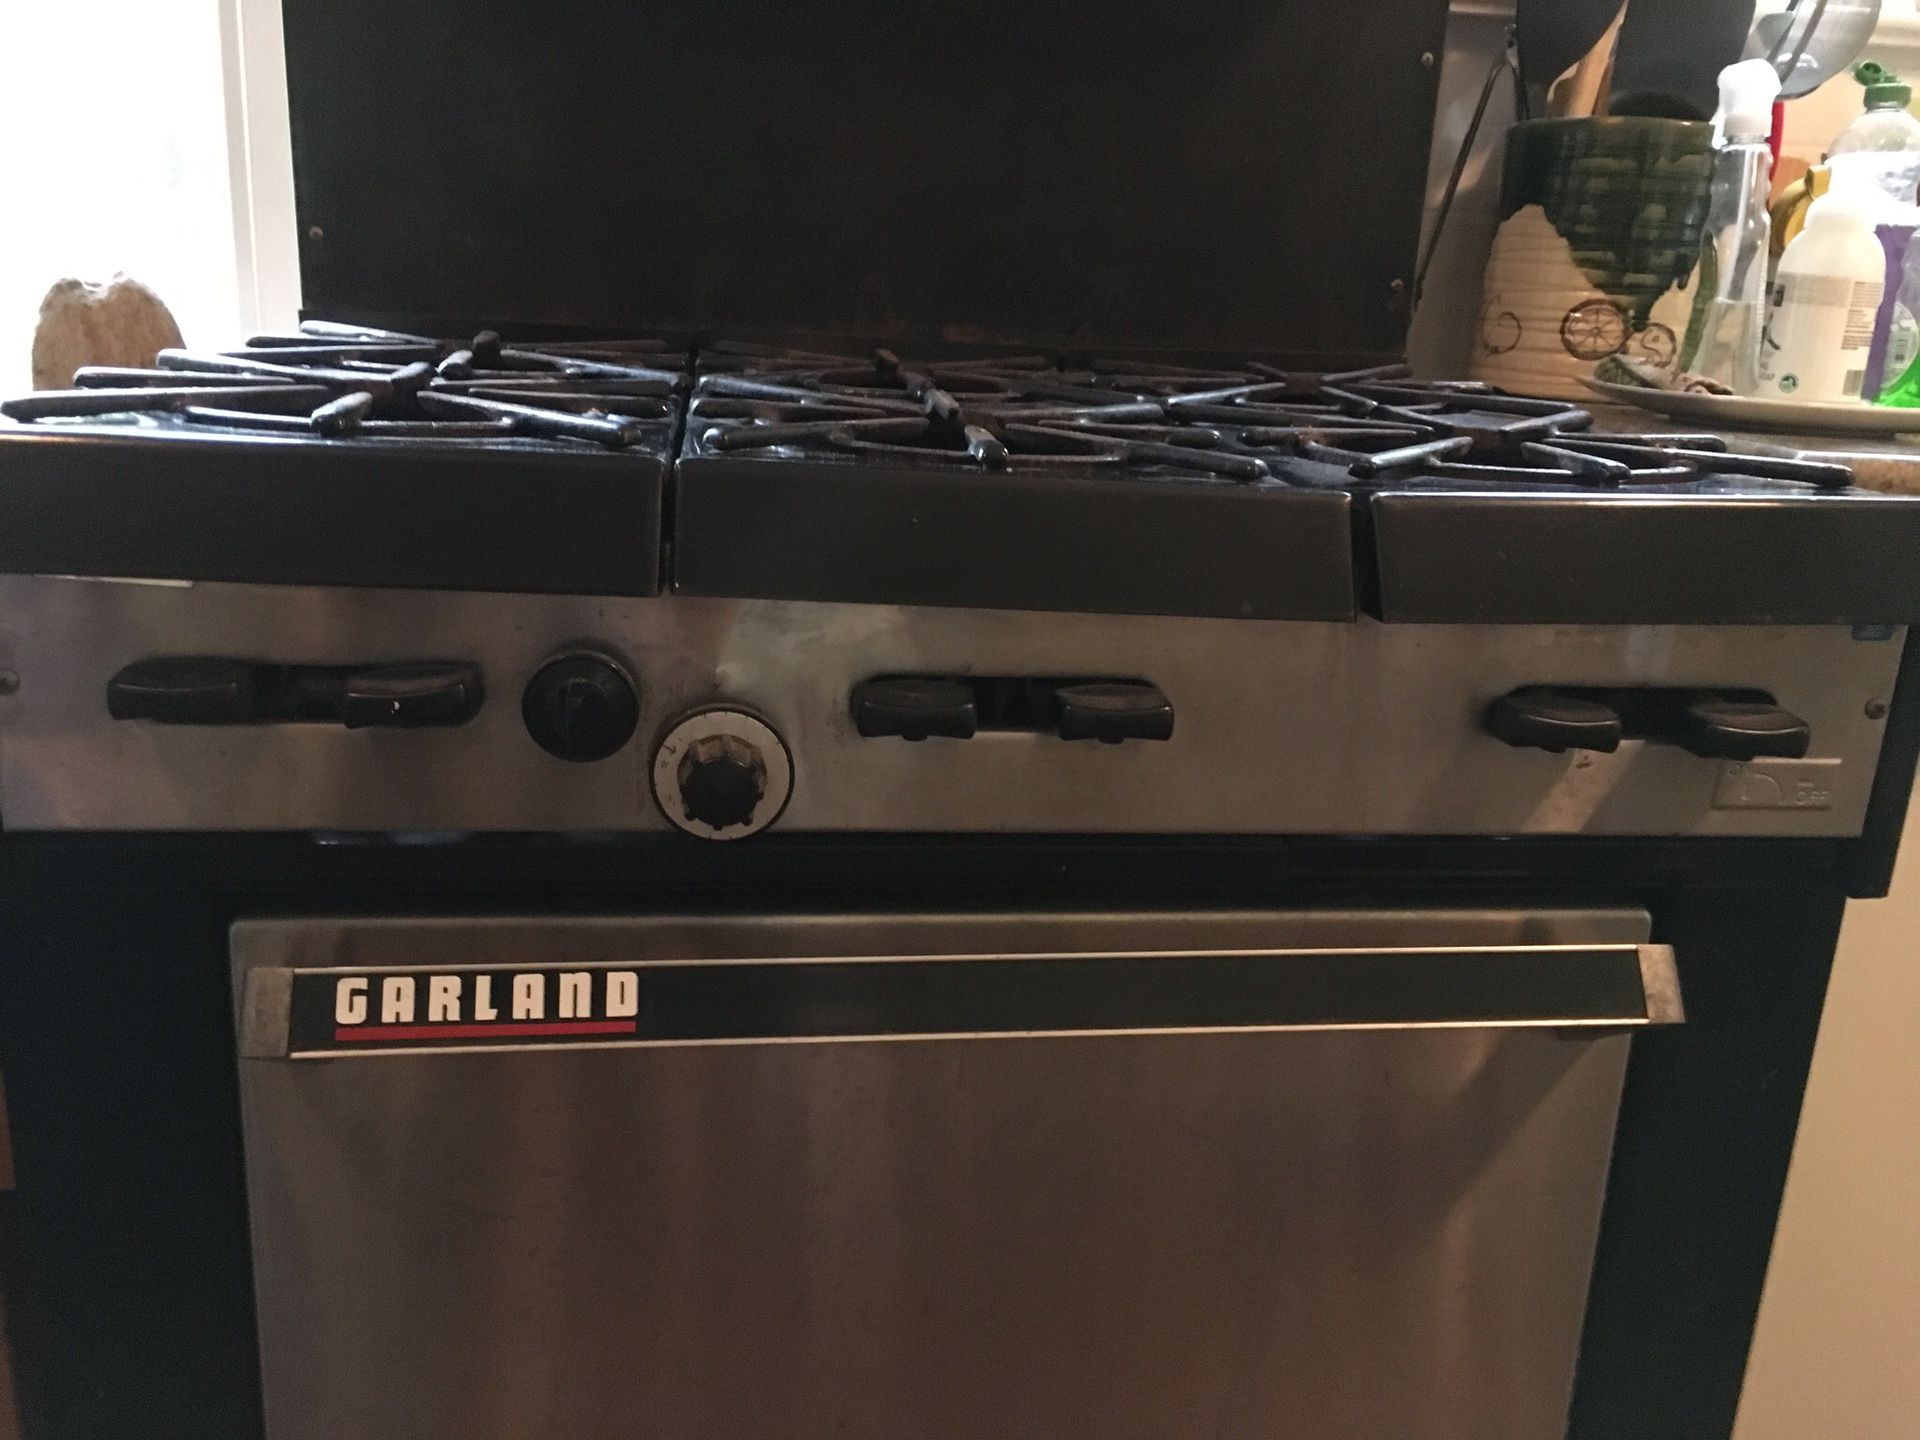 Garland commercial 6 burner propane gas stove and range